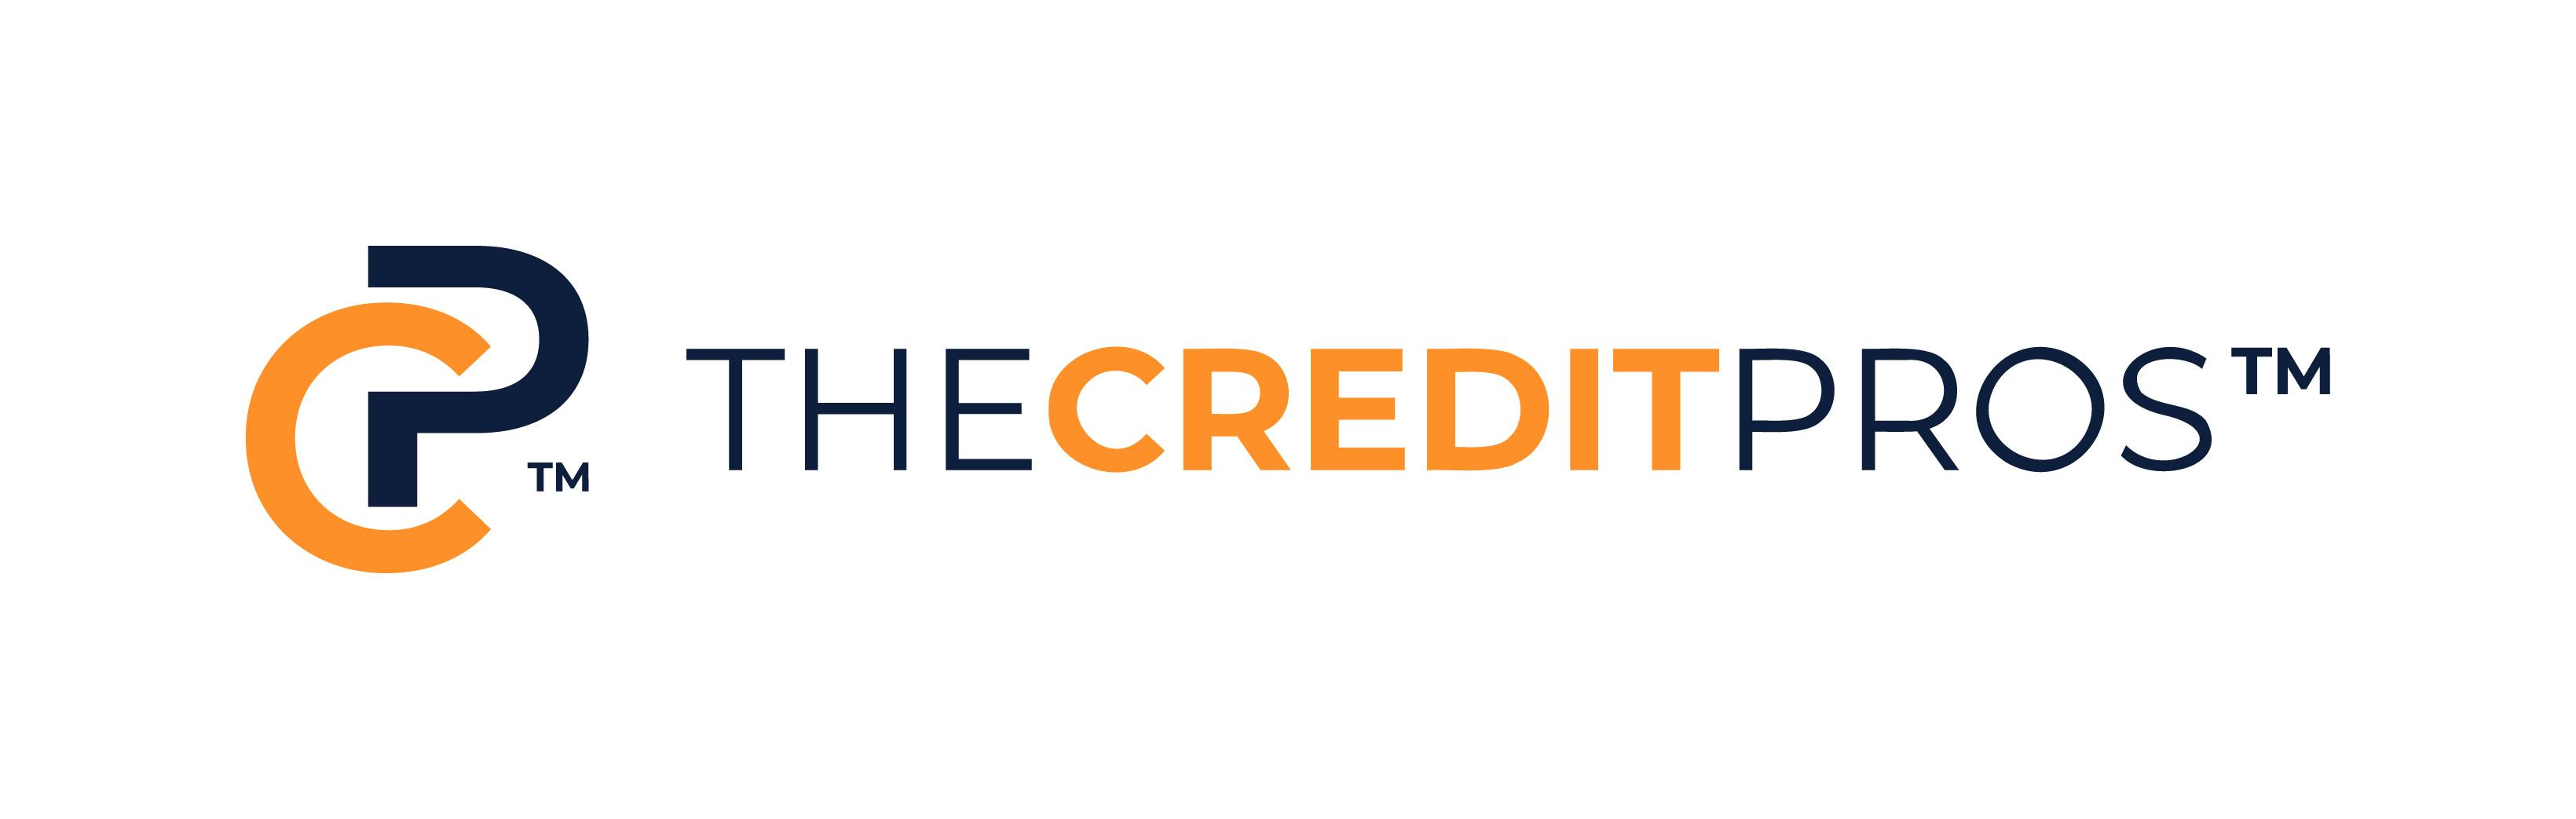 The Credit Pros Review: Are They the Credit Repair Company for You?